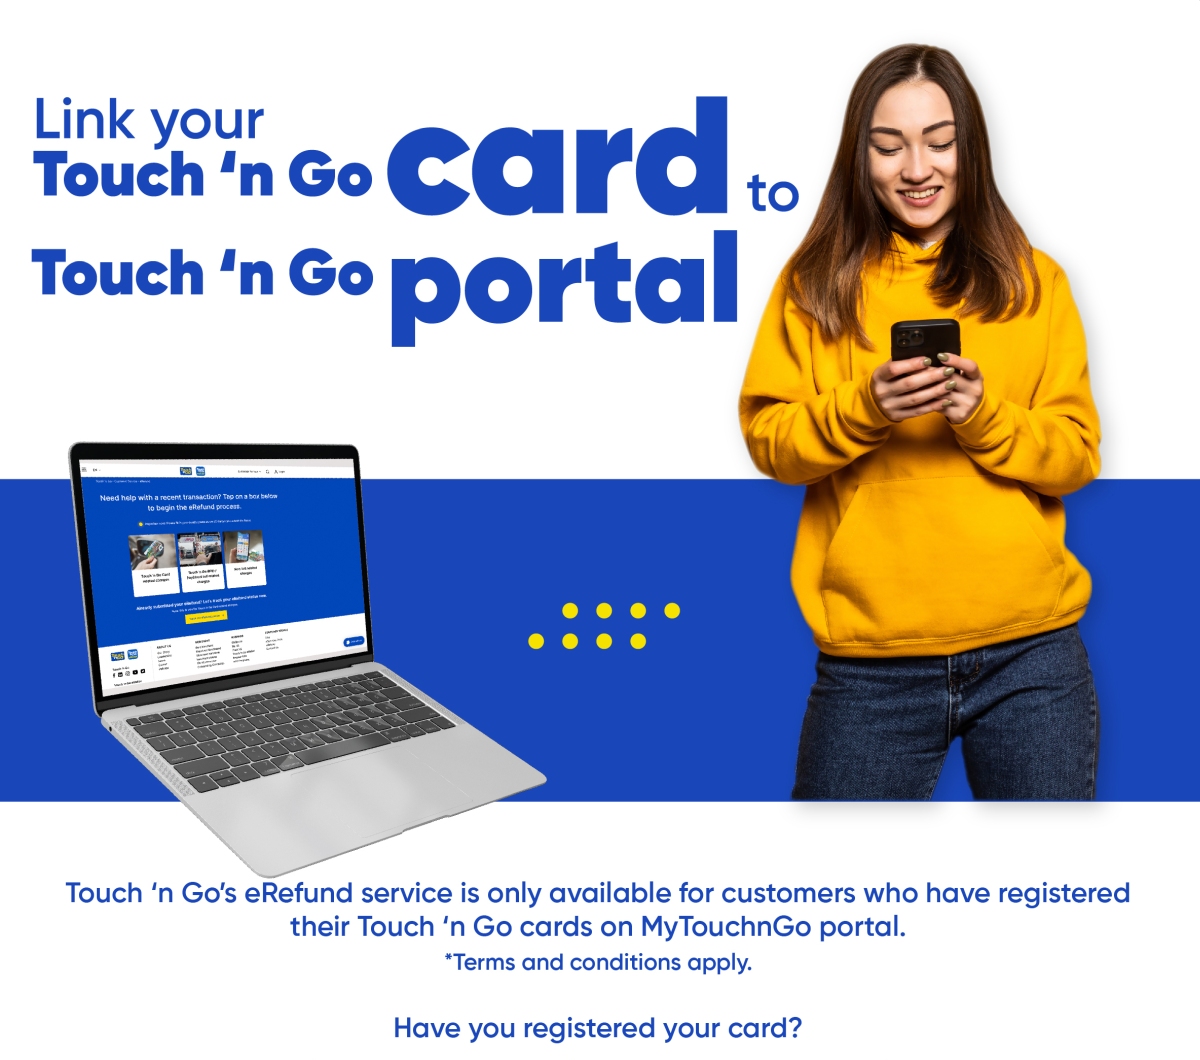 Got the new Touch 'n Go NFC Card? Here's how to request a refund